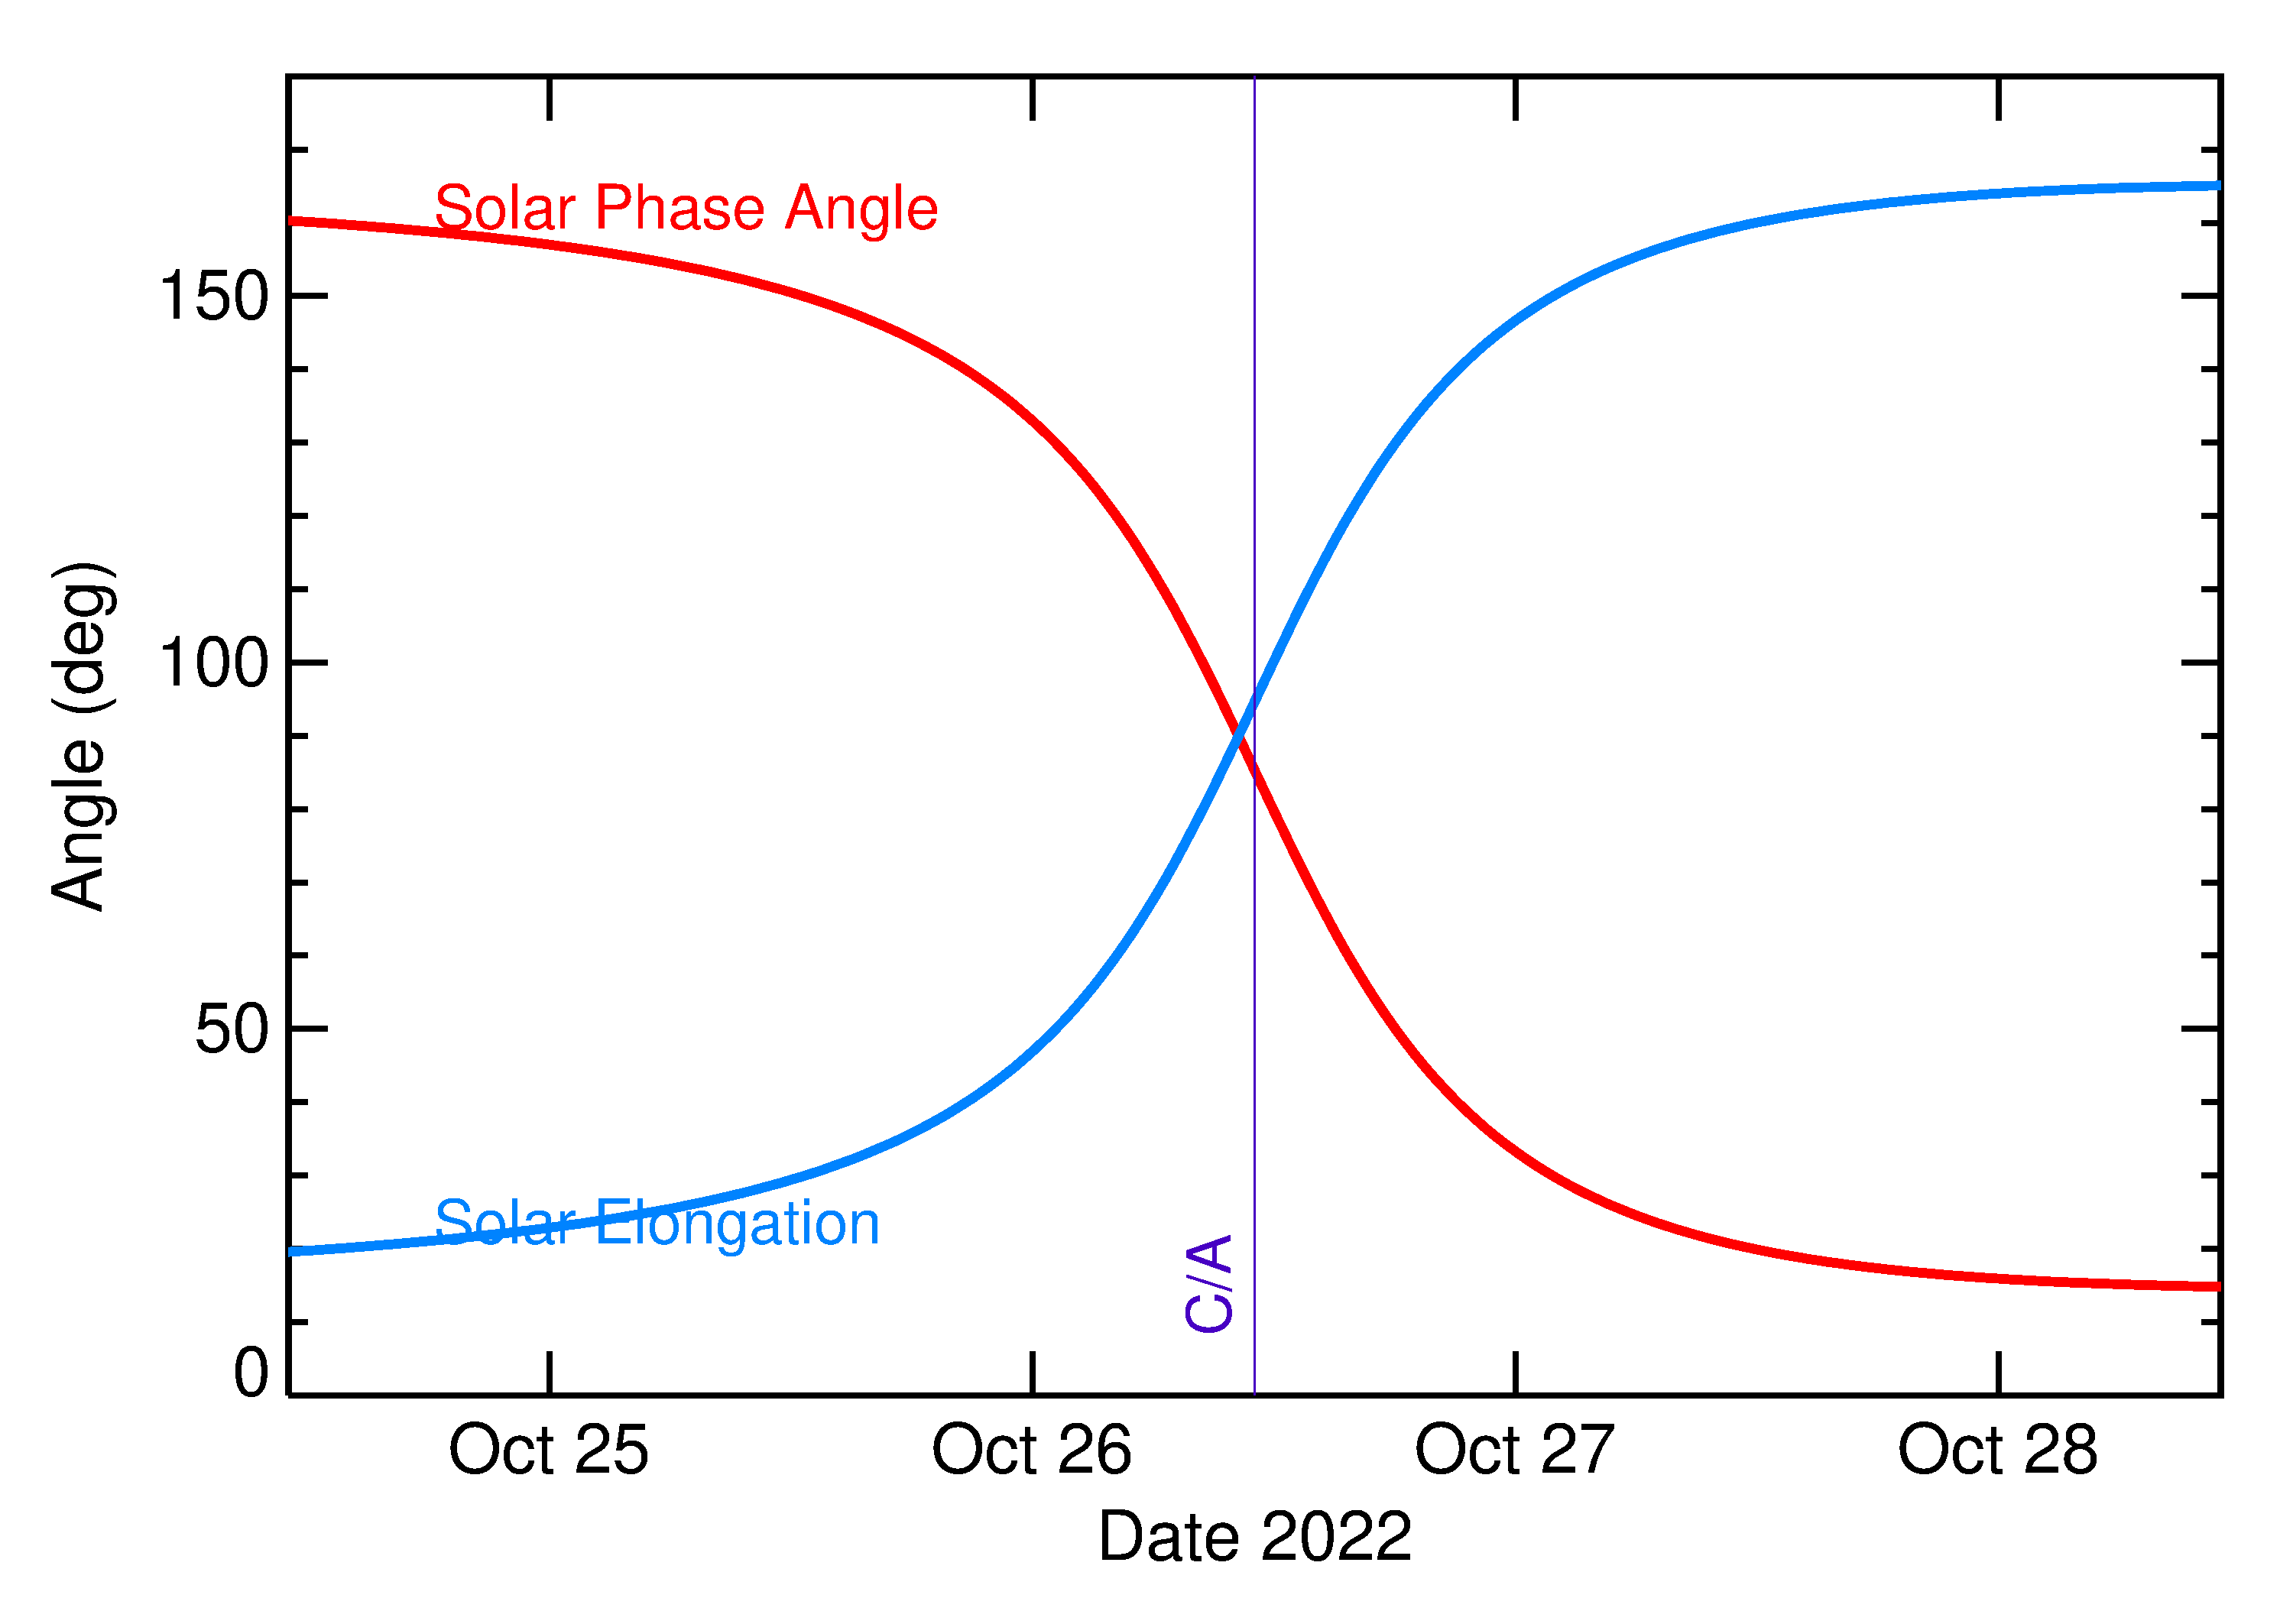 Solar Elongation and Solar Phase Angle of 2022 UC14 in the days around closest approach